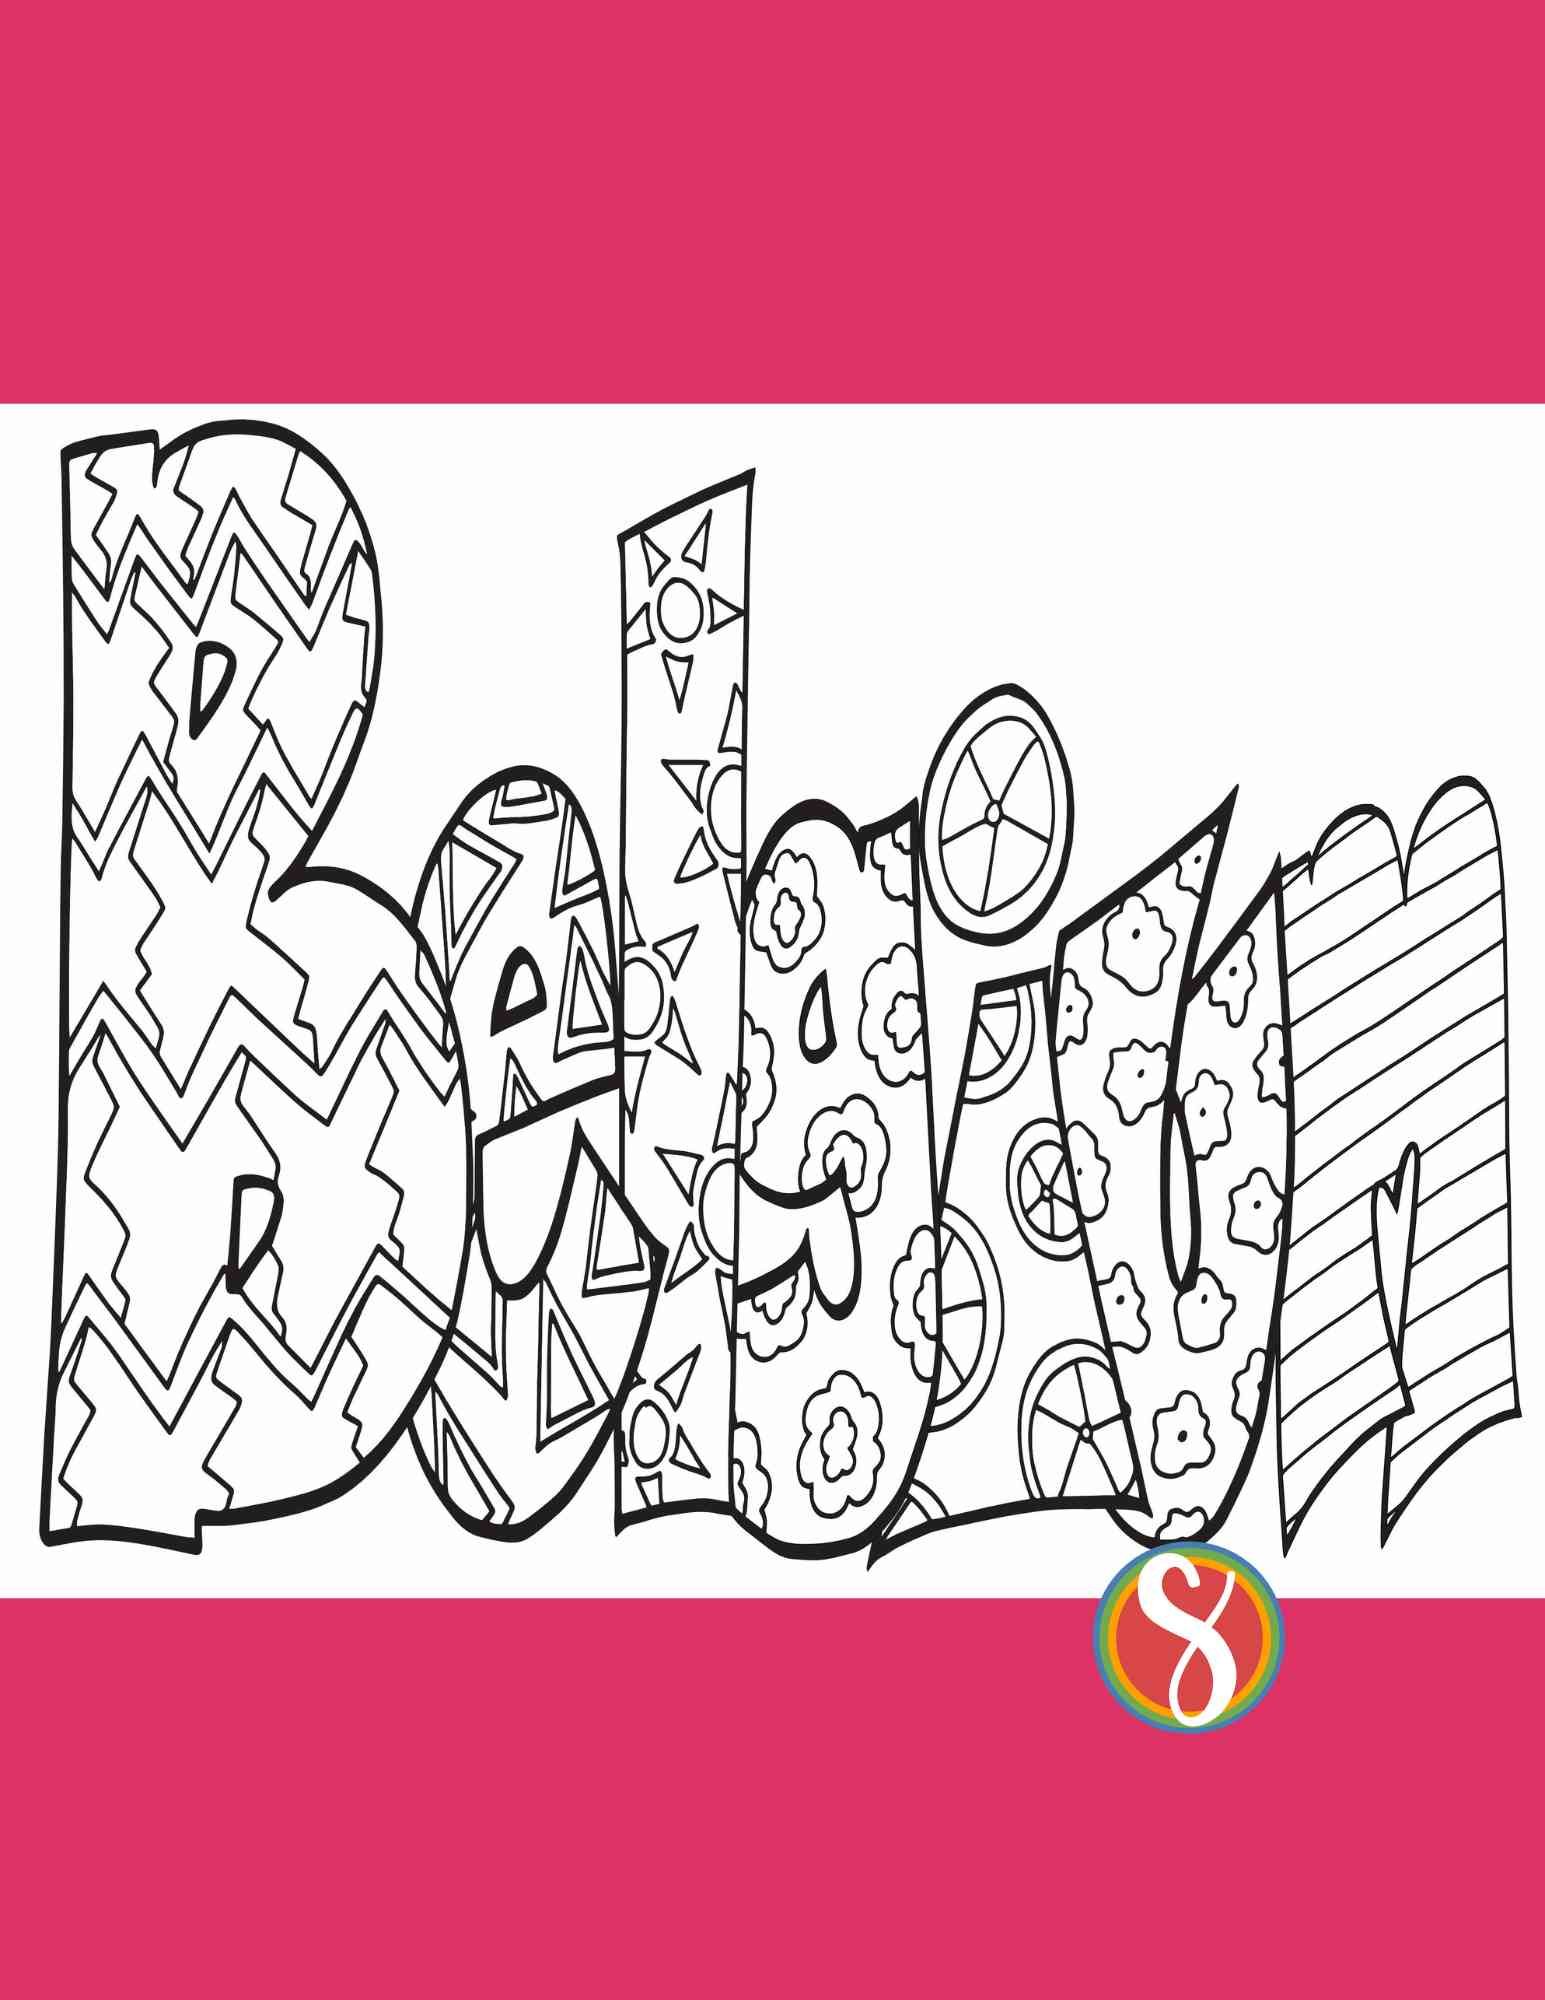 belgium coloring page belgium bubble letters filled with doodles